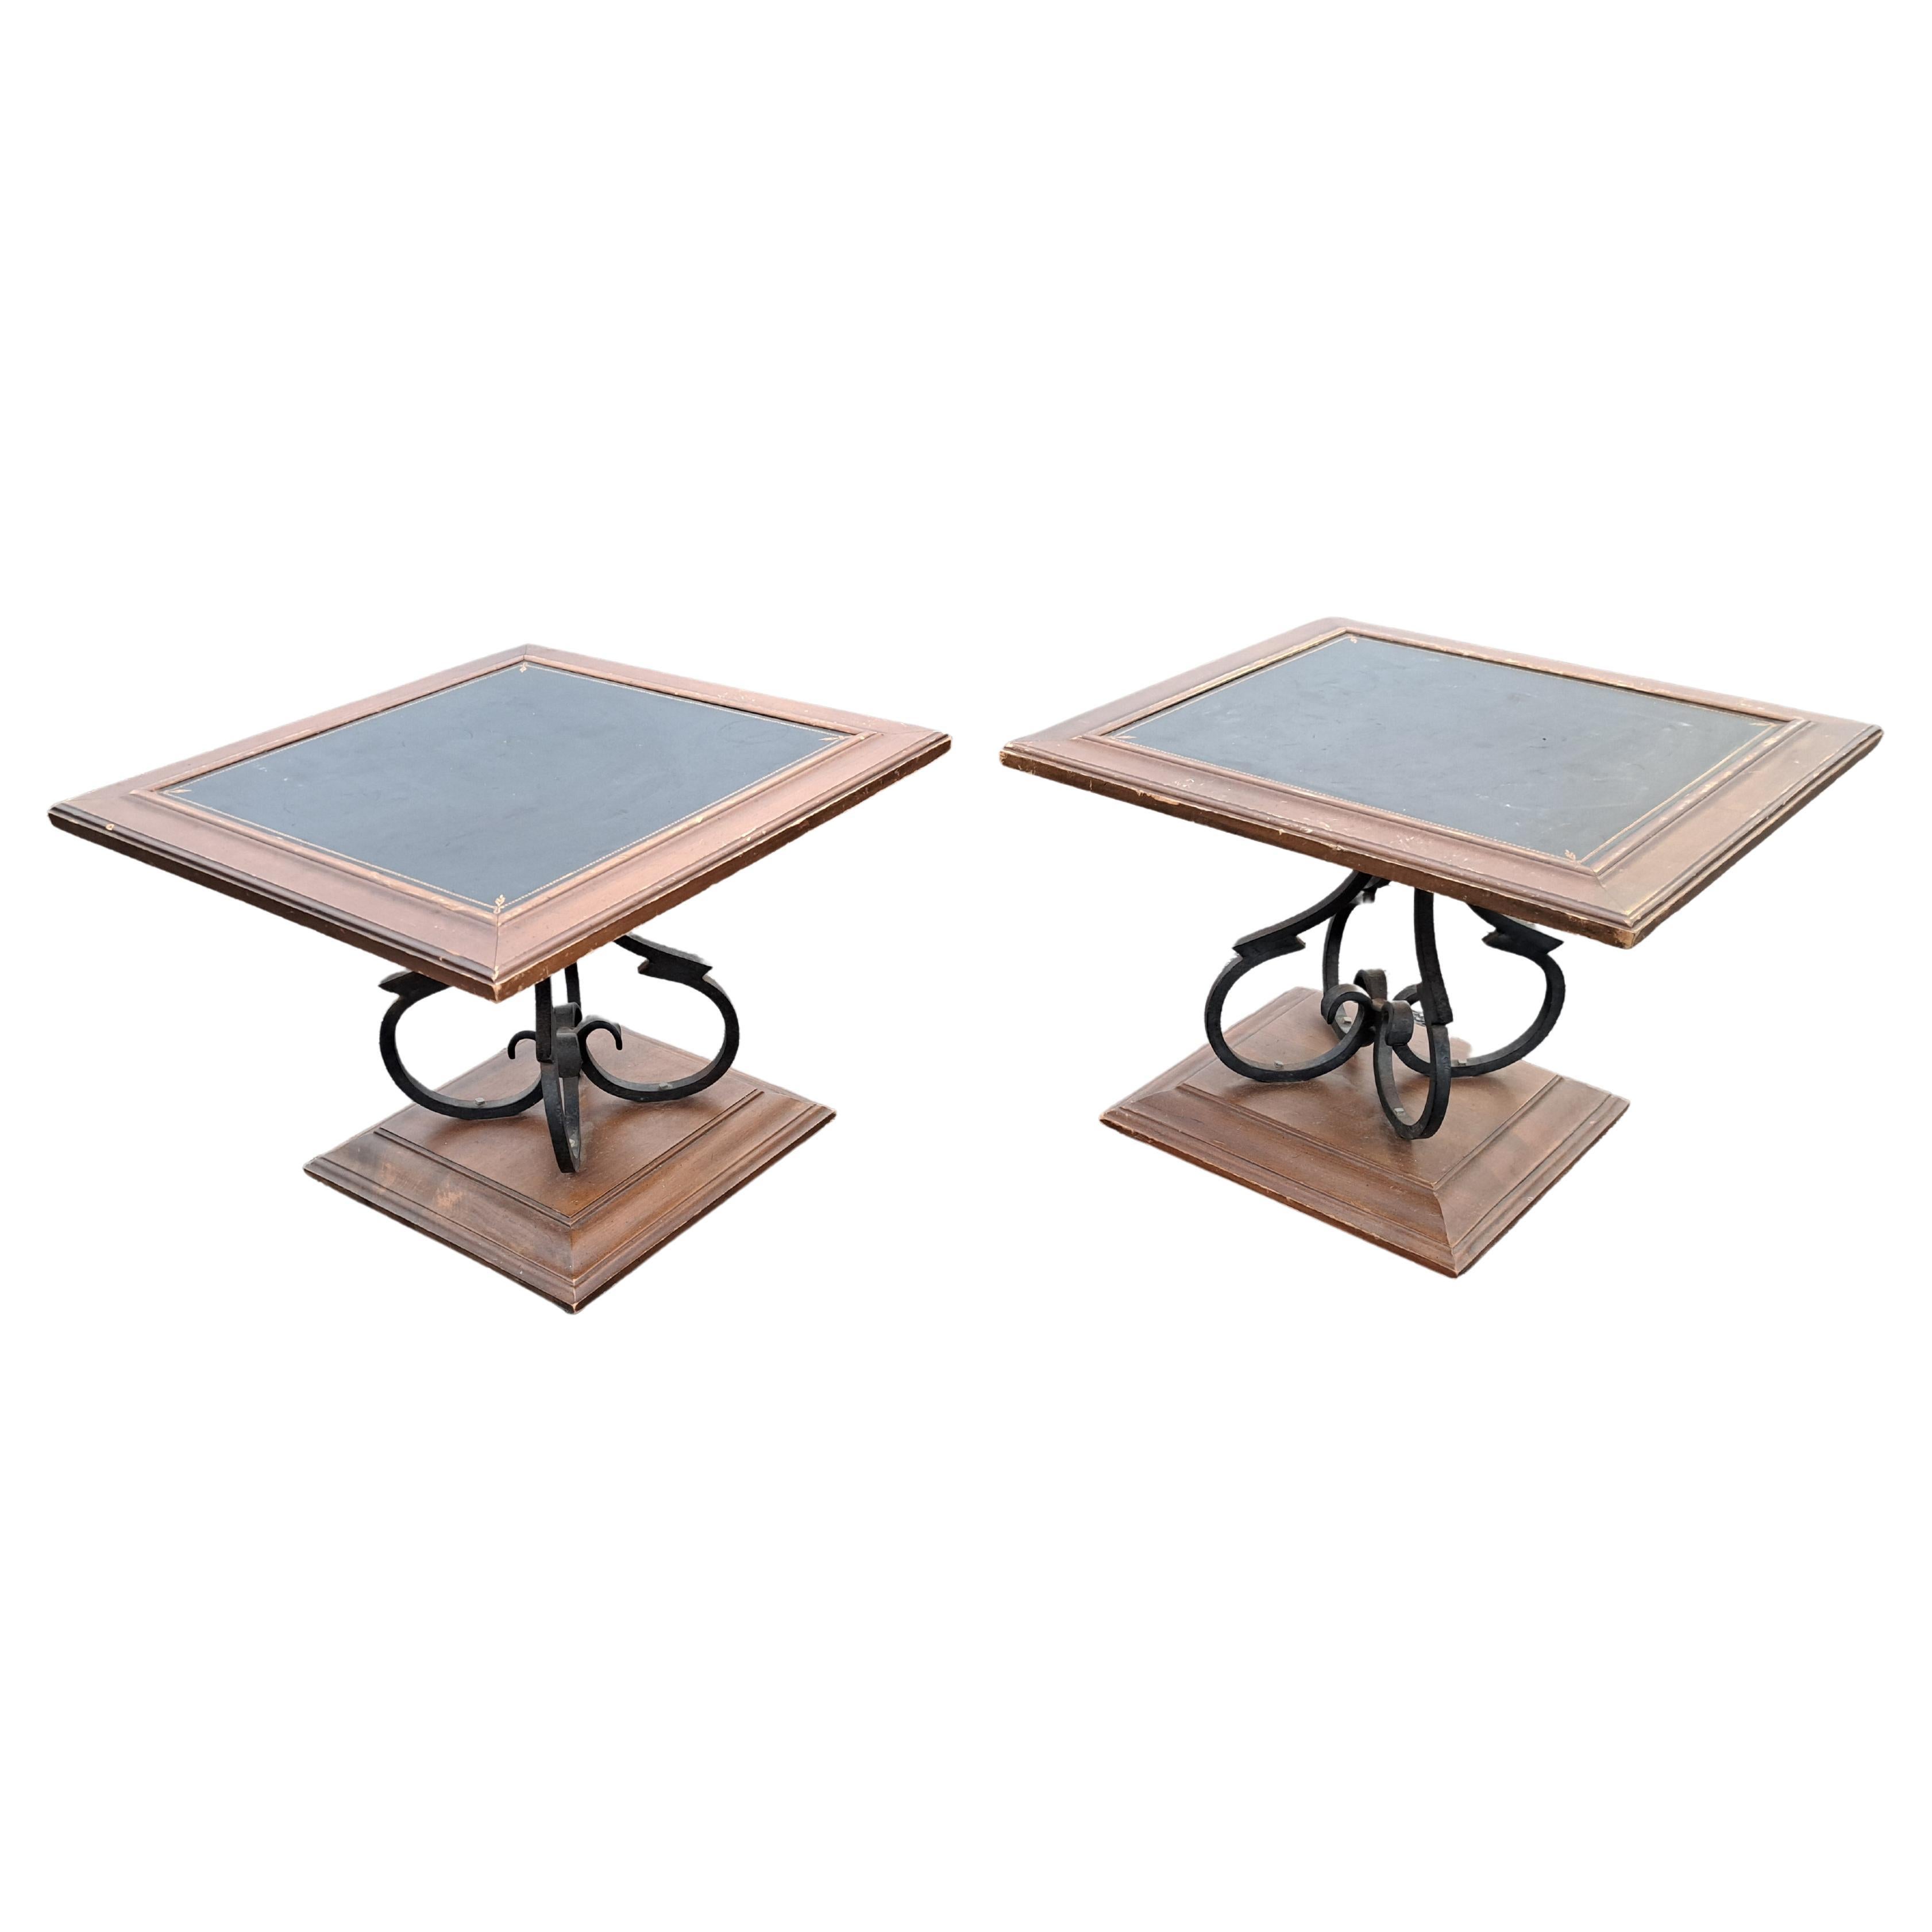 Mid Century Scrolled Wrought Iron, Wood & Leather Low Swivel Side Tables -A Pair For Sale